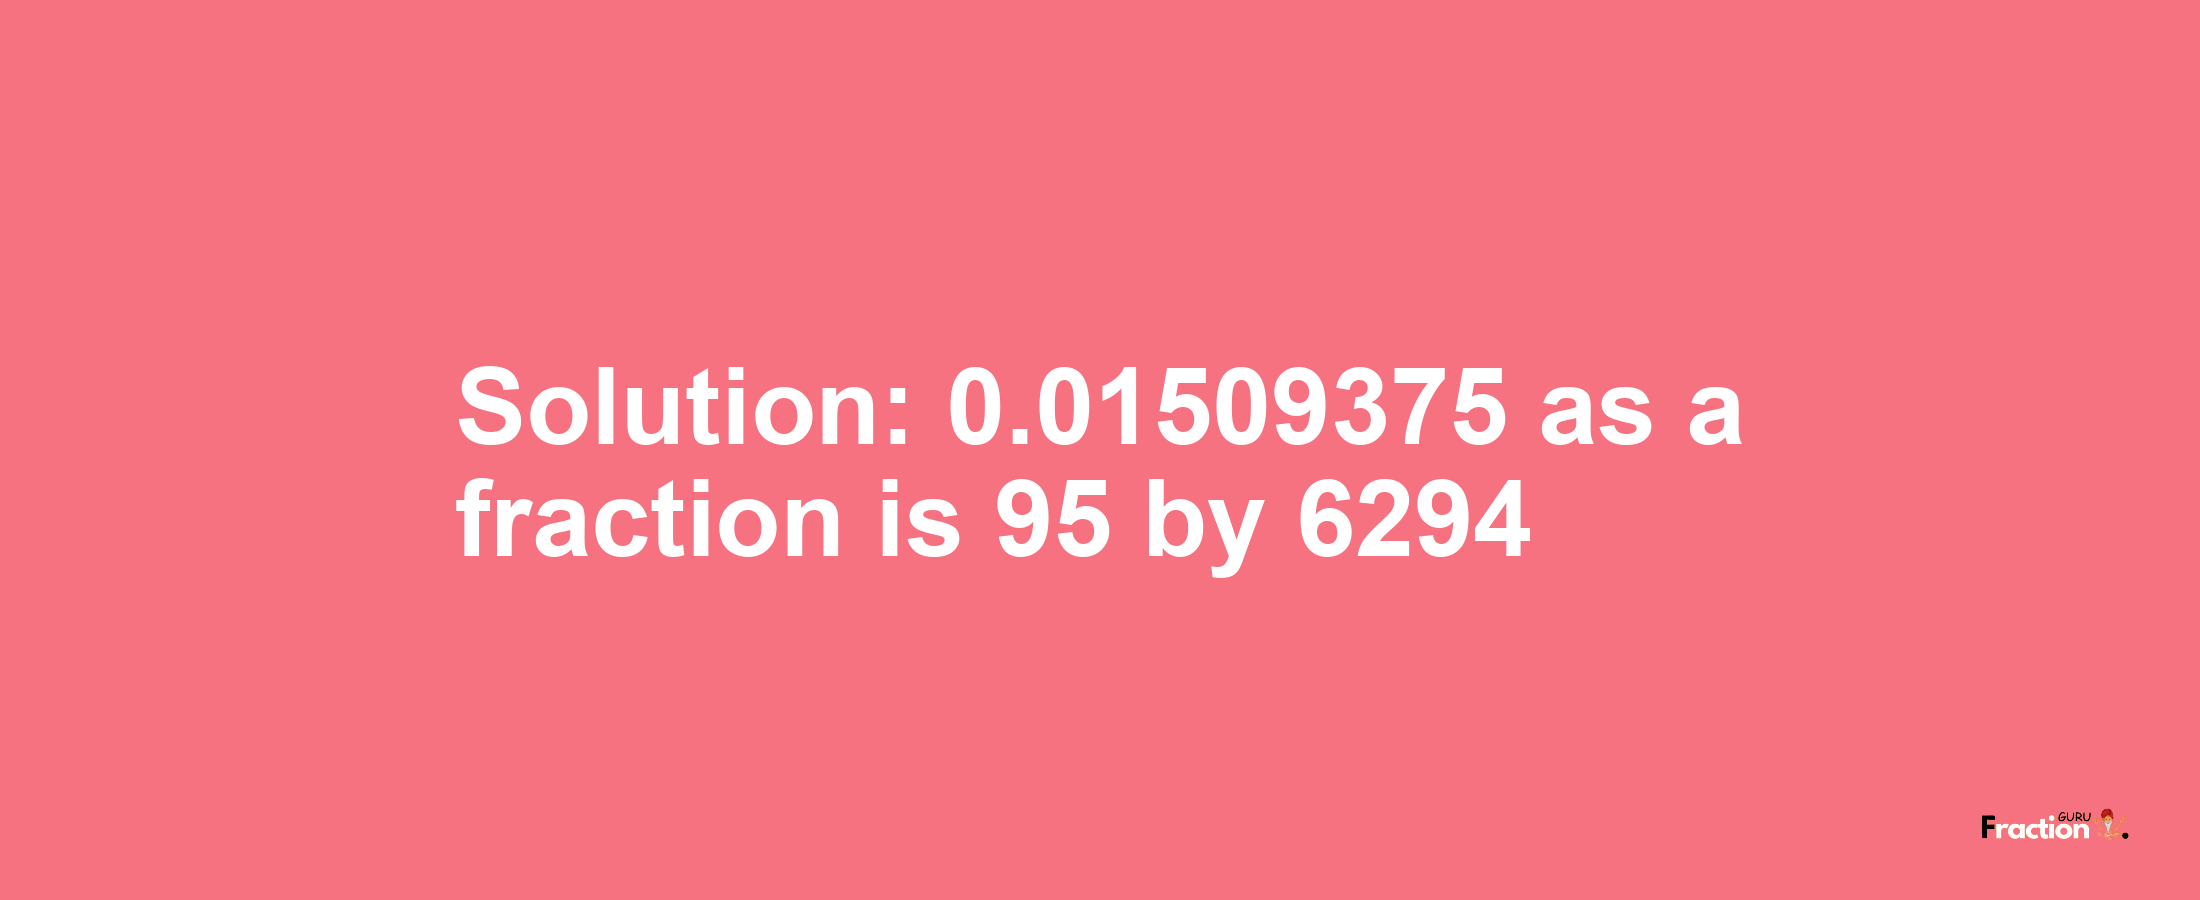 Solution:0.01509375 as a fraction is 95/6294